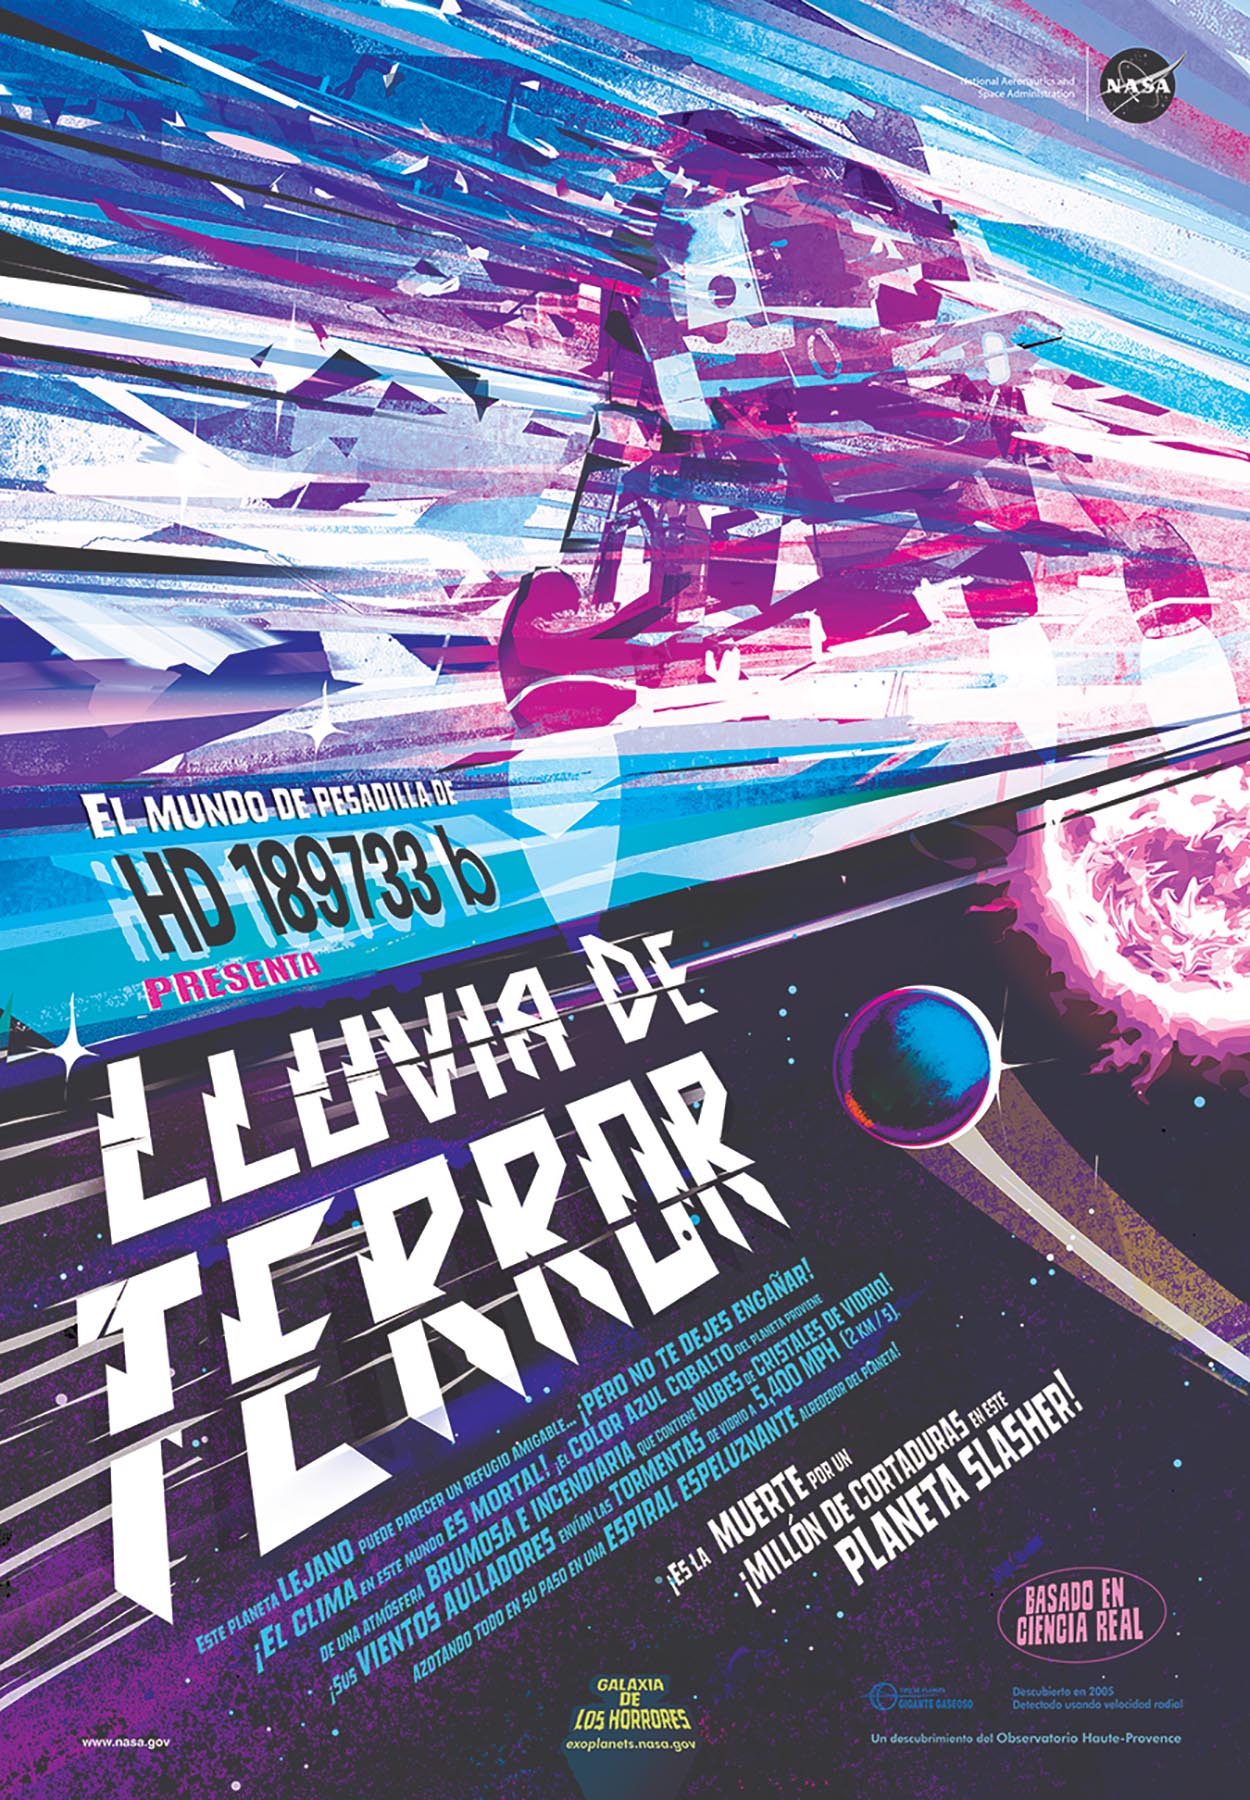 A poster done in the style of a vintage poster for a horror movie. Reading "Rains of Terror" It's death by a million cuts on this slasher planet. Jagged edges of glass can be seen battering a spacecraft on this alien world.